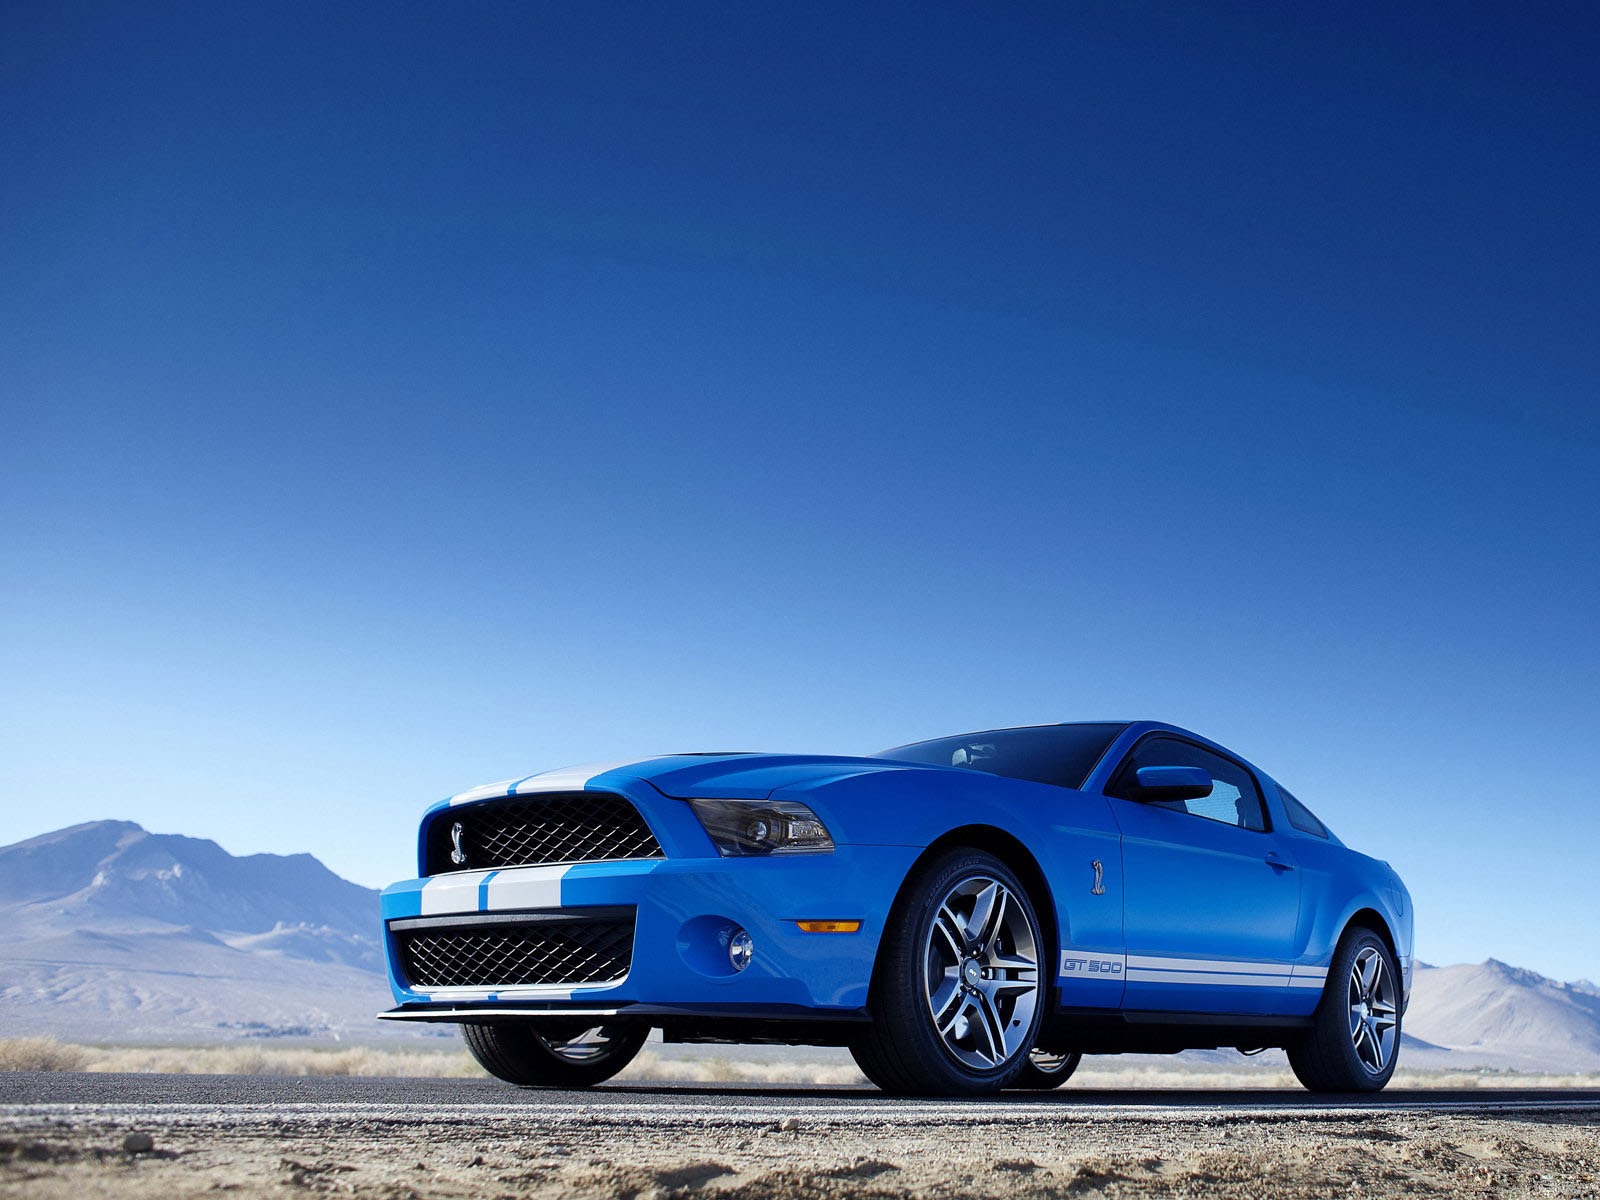 Wallpaper Ford Mustang Shelby Gt500 Car